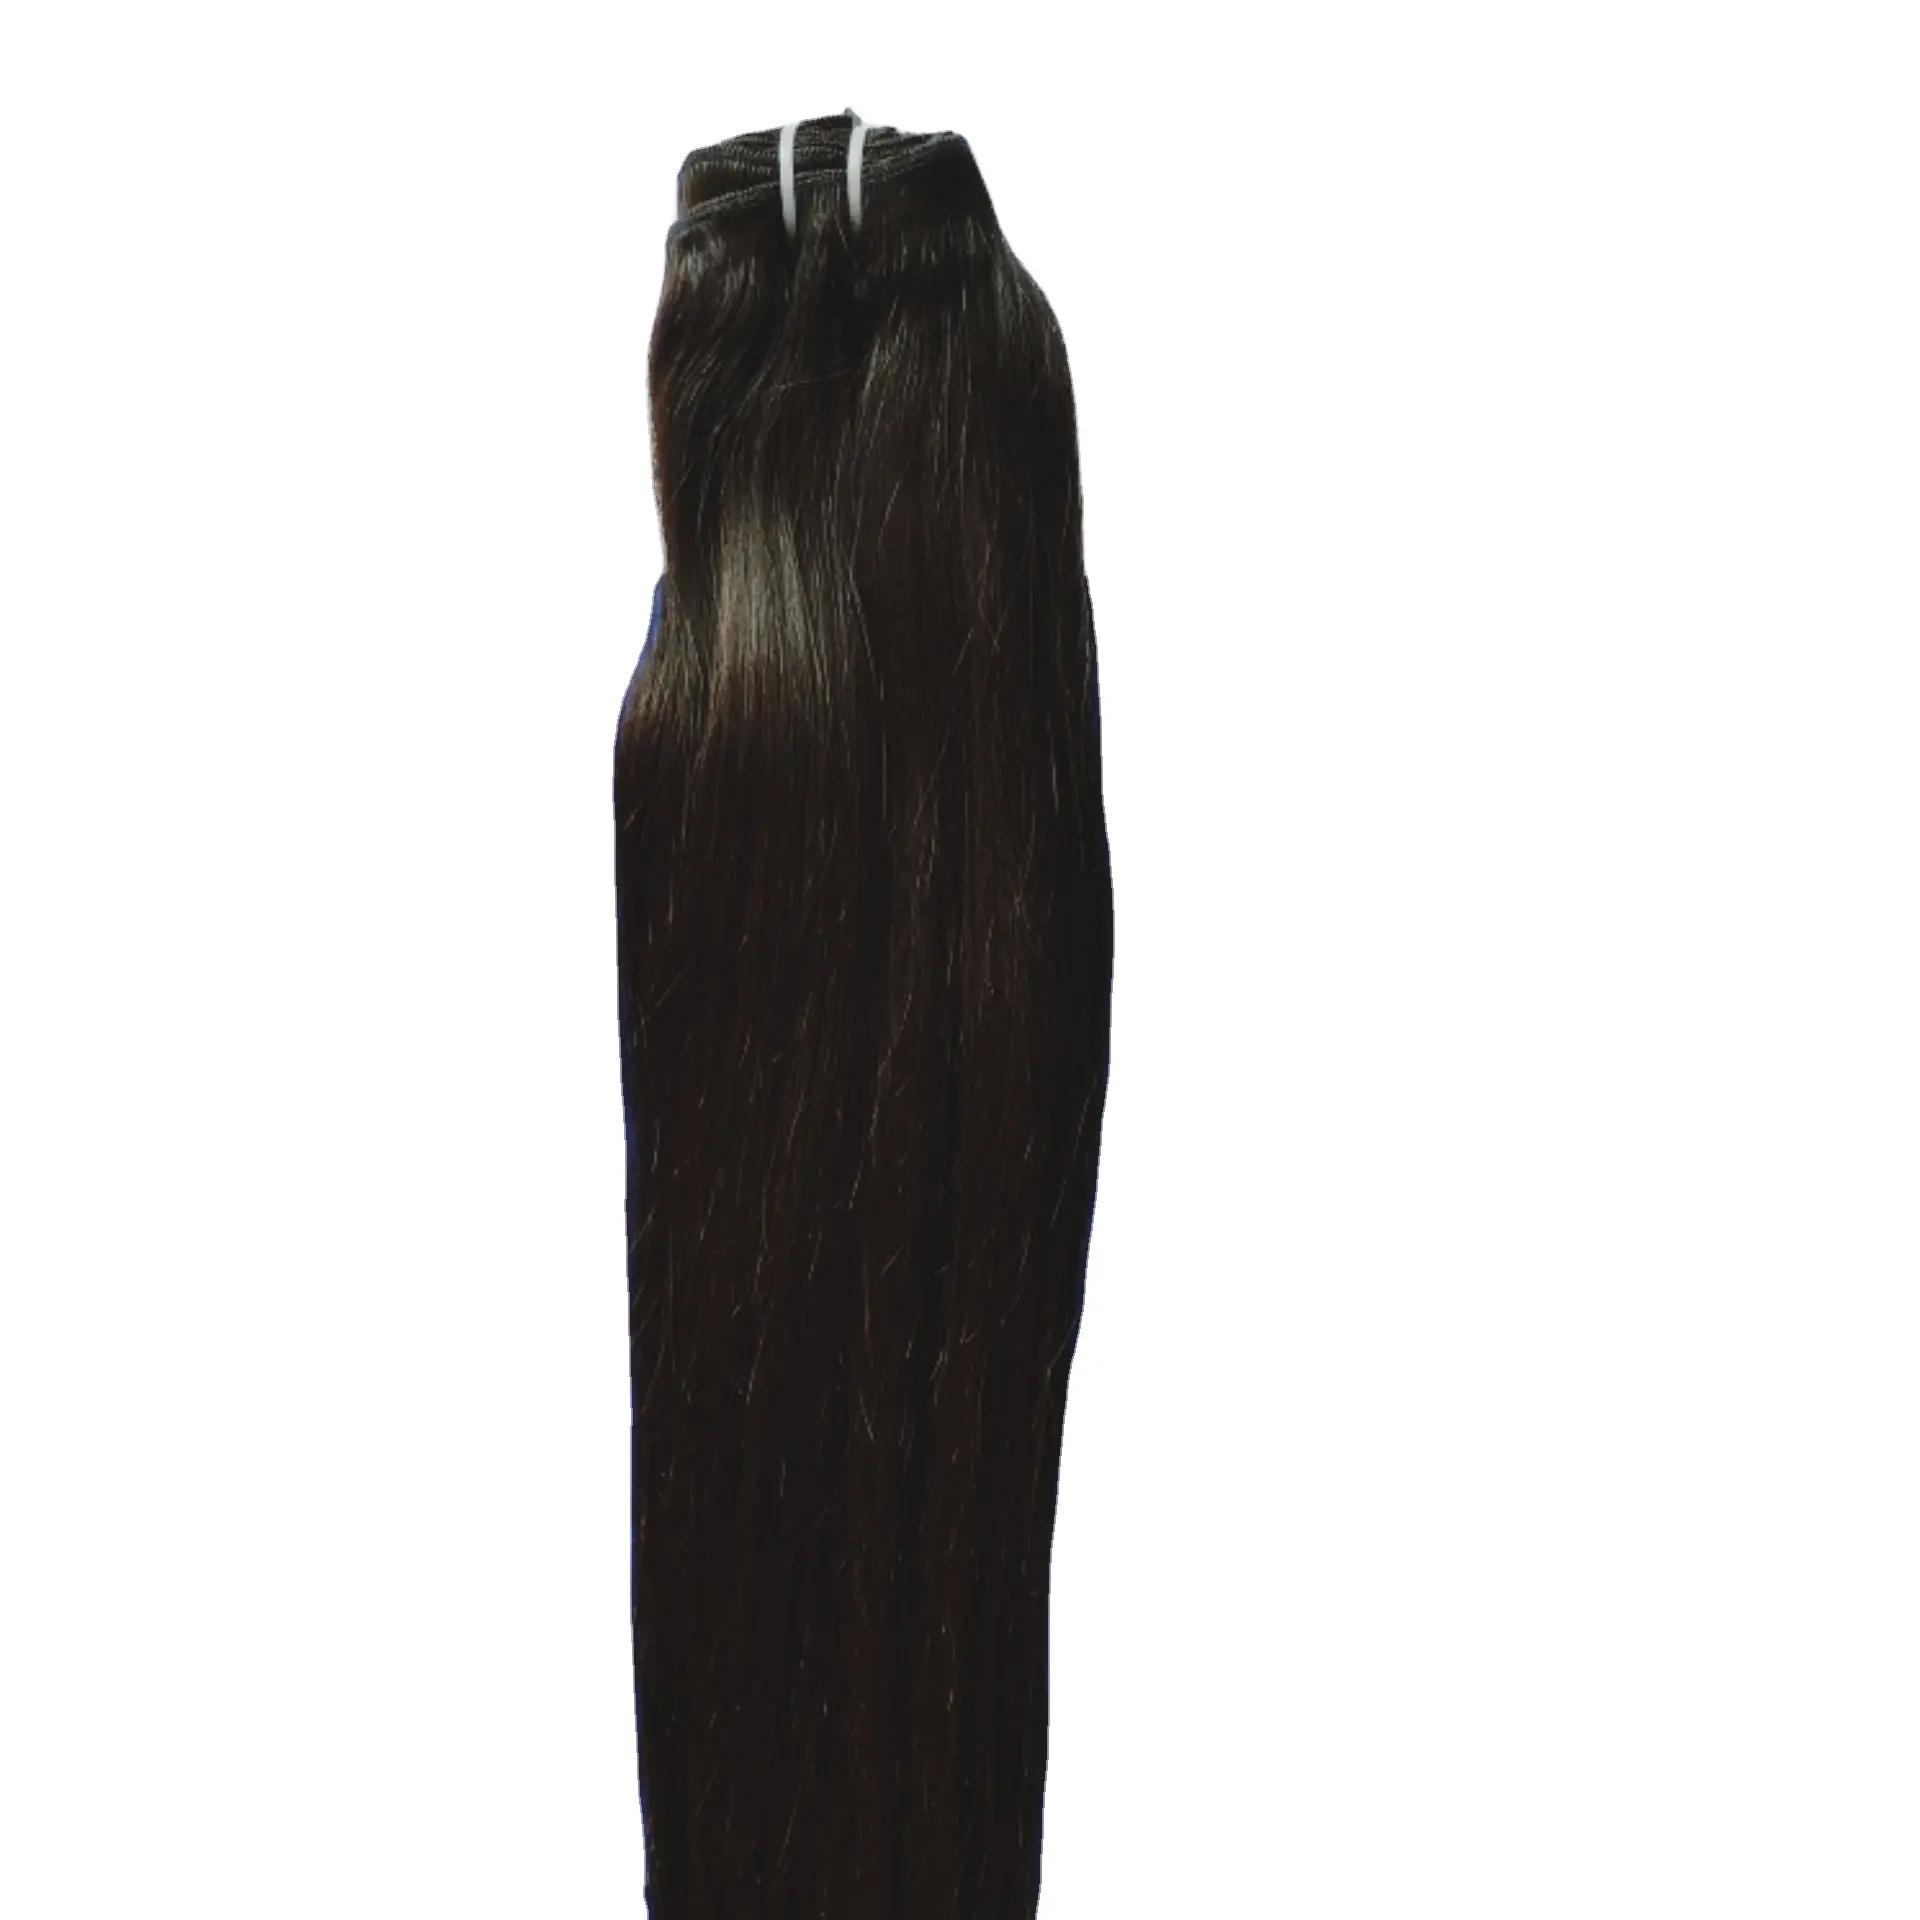 Raw virgin unprocessed natural straight bundle hair cuticle aligned Indian human hair extensions